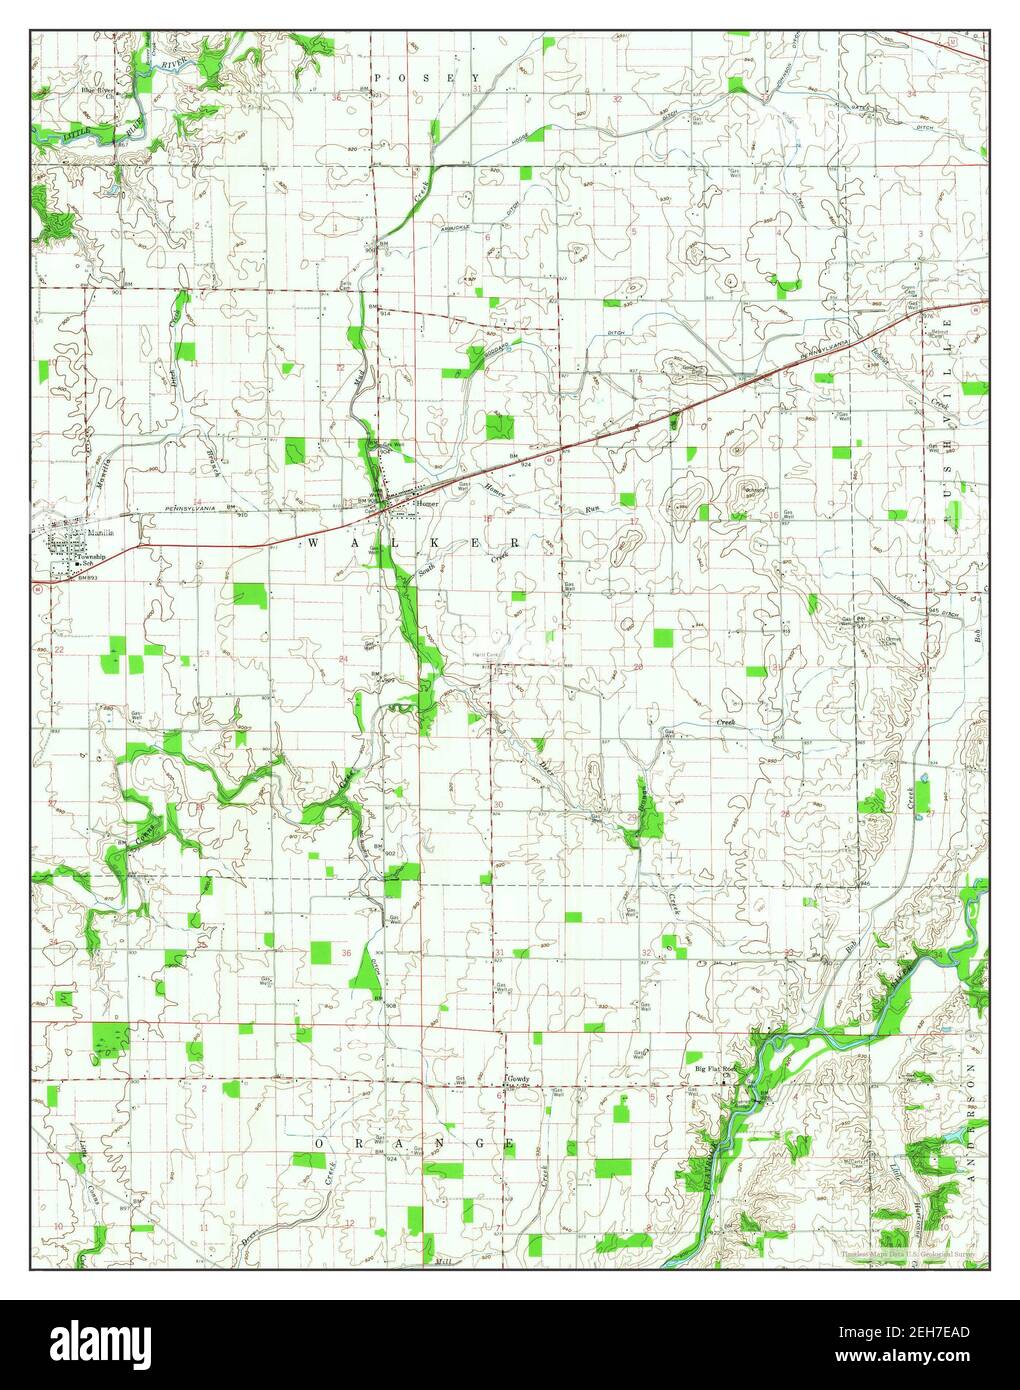 Manilla, Indiana, map 1960, 1:24000, United States of America by Timeless Maps, data U.S. Geological Survey Stock Photo